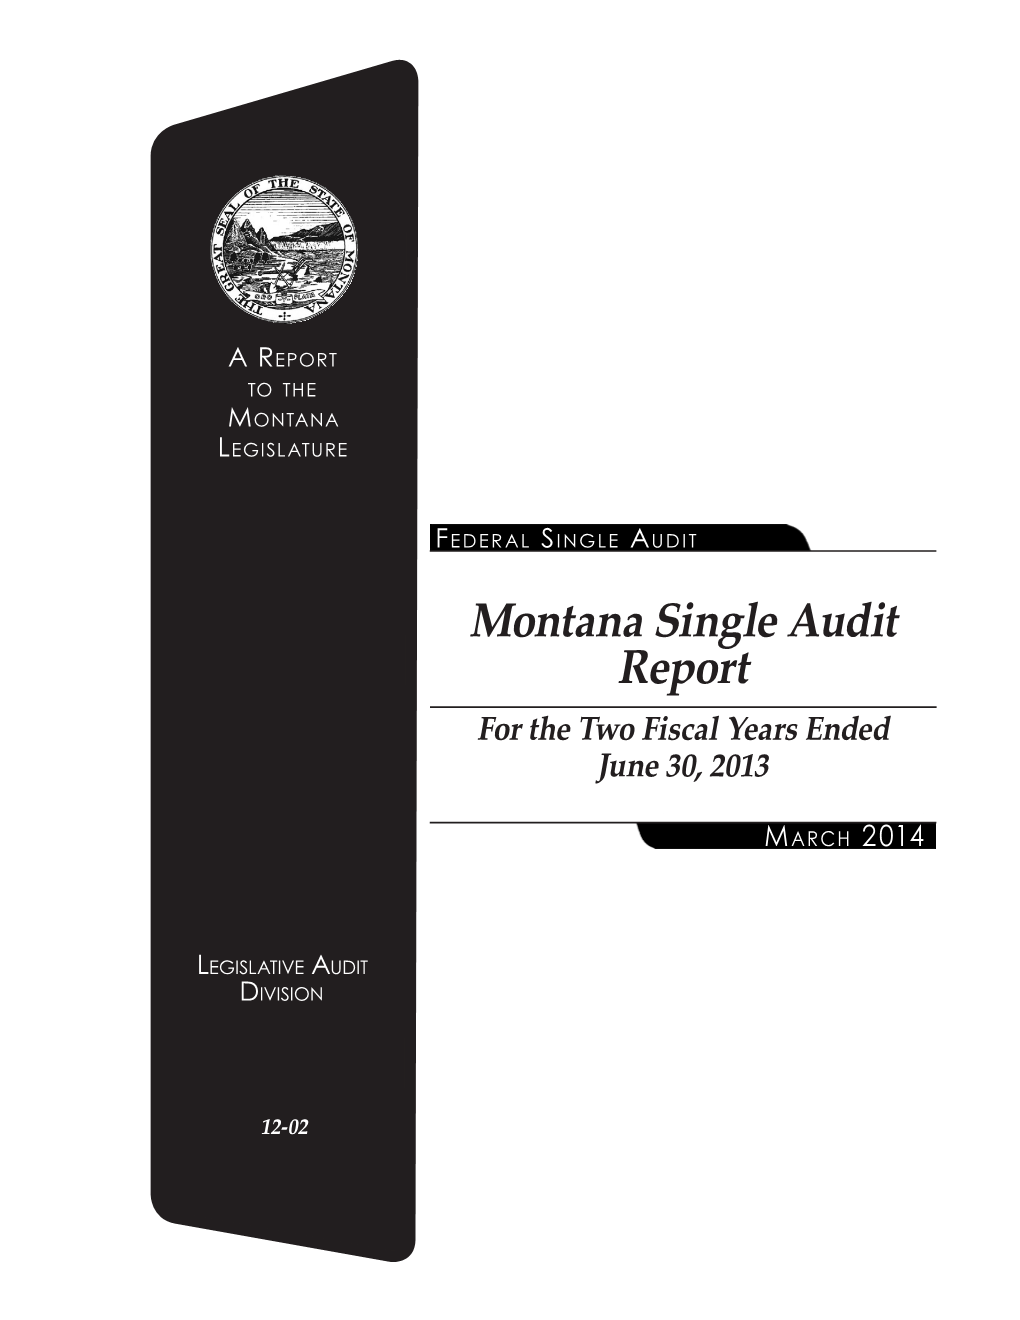 Montana Single Audit Report for the Two Fiscal Years Ended June 30, 2013